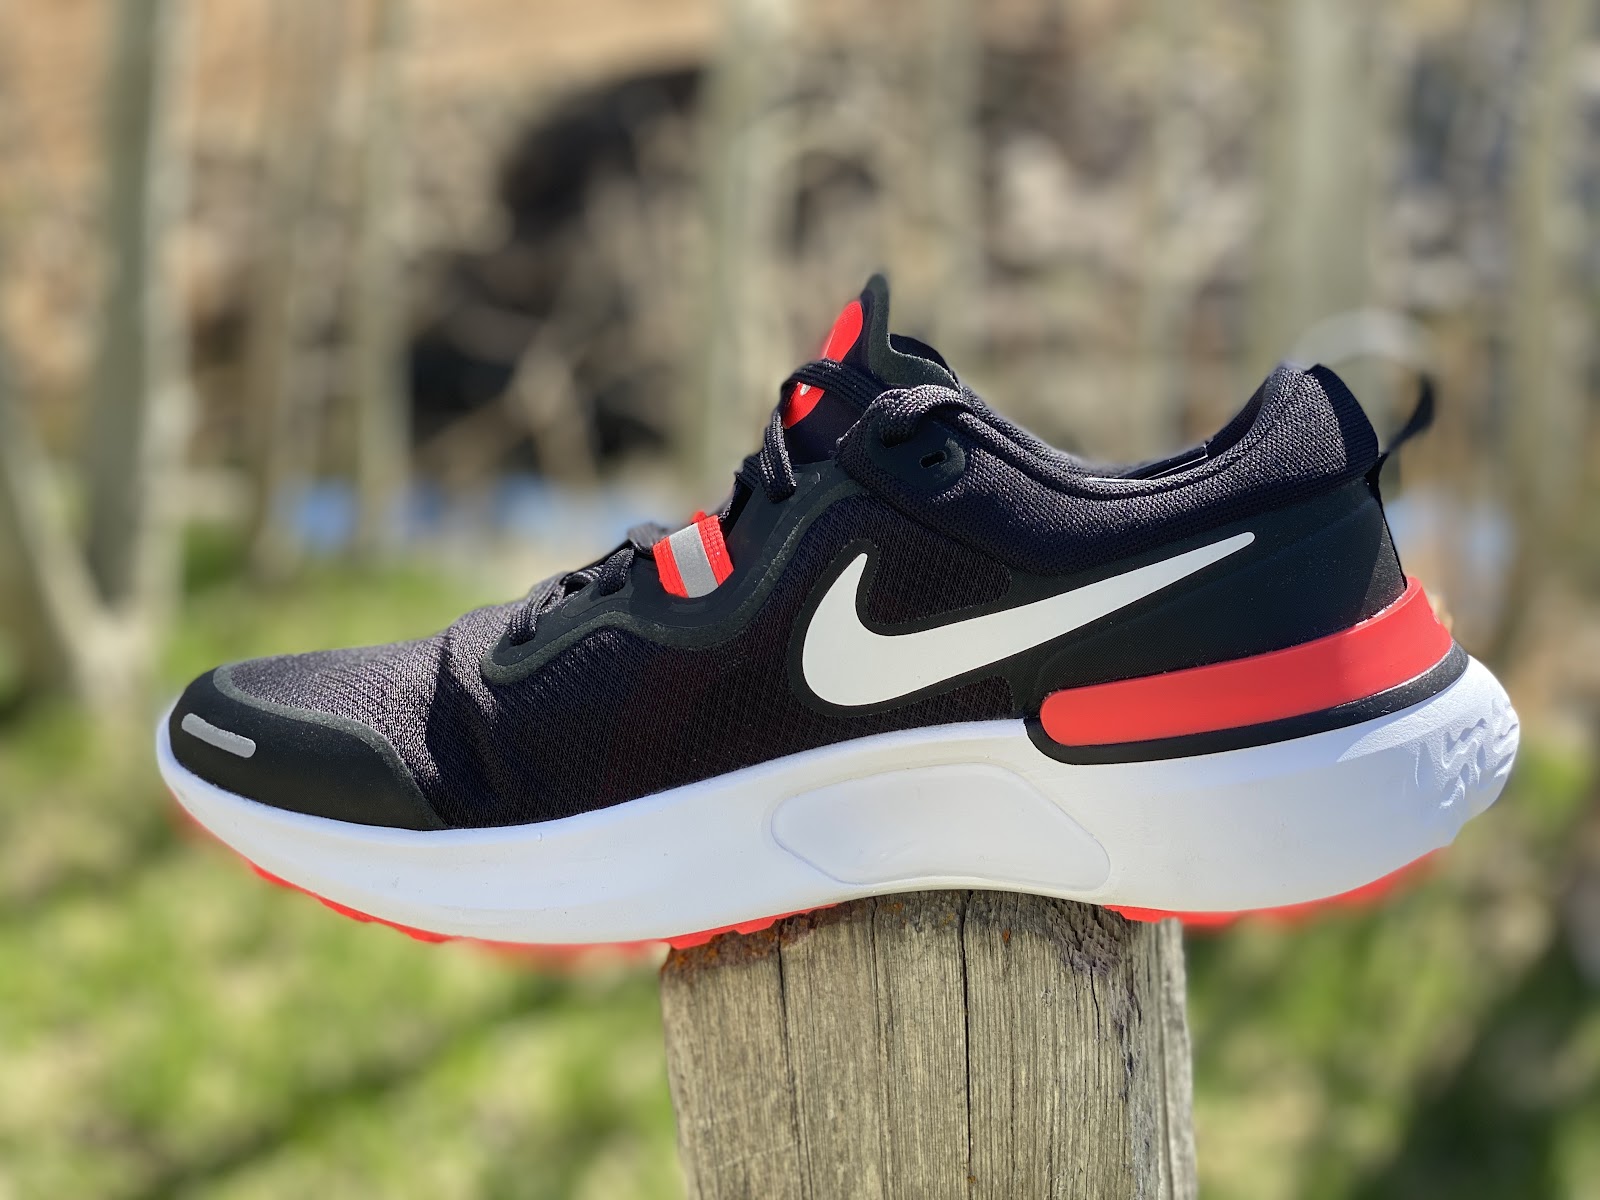 Road Trail Run: Nike React Miler 1st Run Review, Shoe Details, and  Comparisons